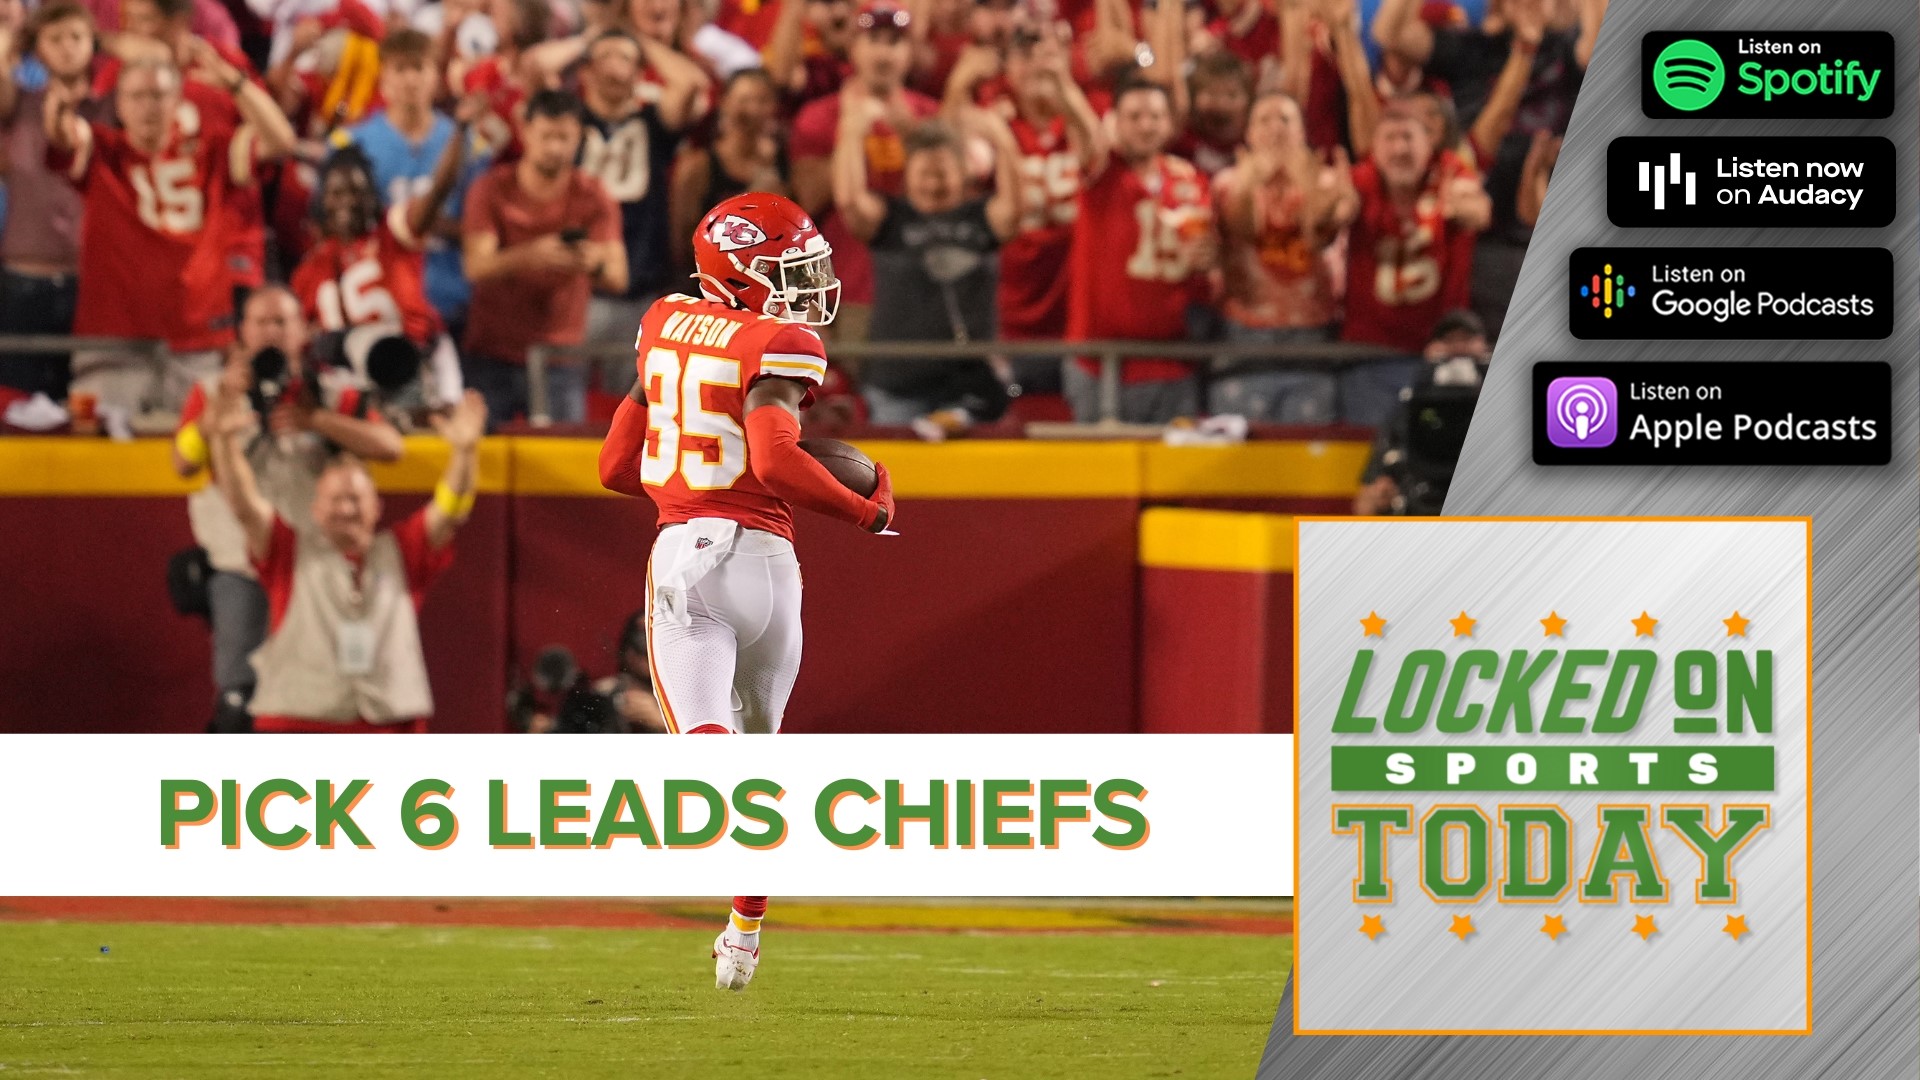 Discussing and debating the day's top sports stories from the Chiefs' defense stepping up to beat the Chargers to all of the drama to play out in NFL week 2 games.